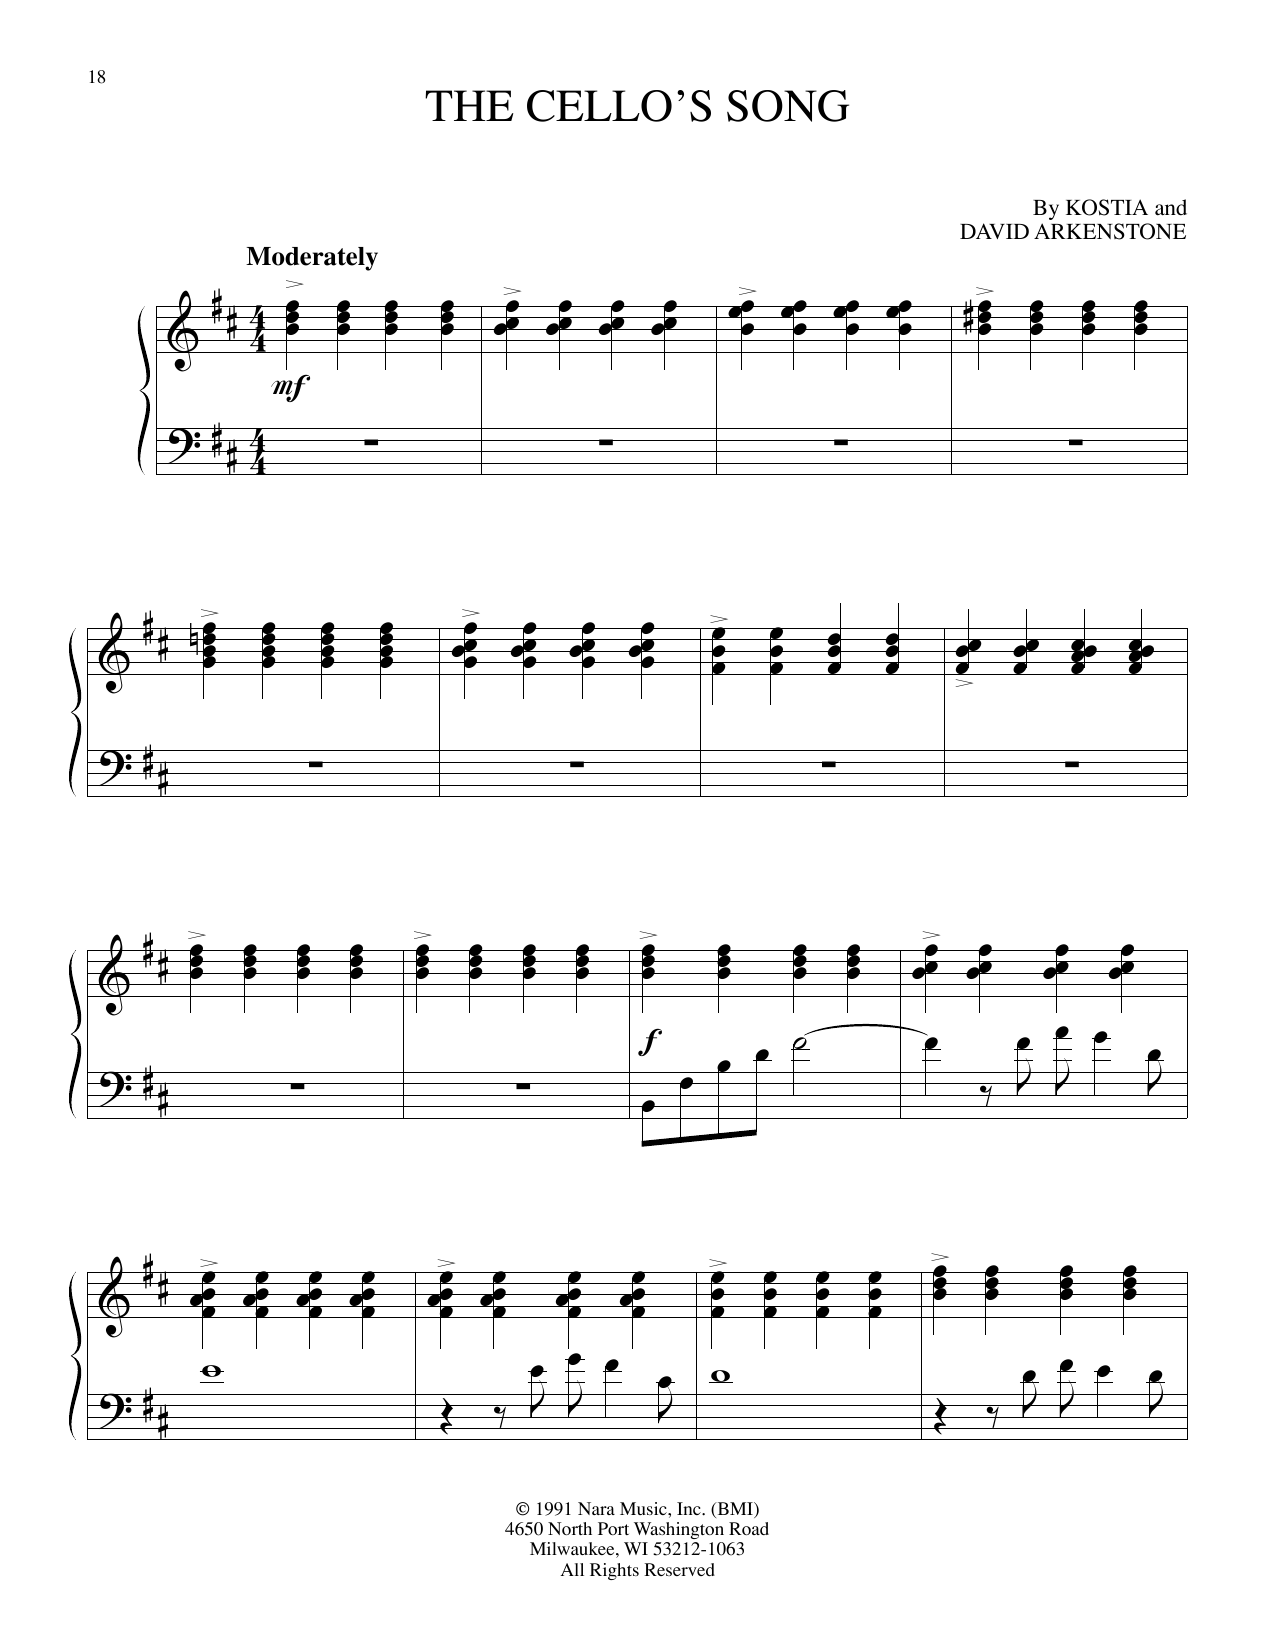 Download Kostia and David Arkenstone The Cello's Song Sheet Music